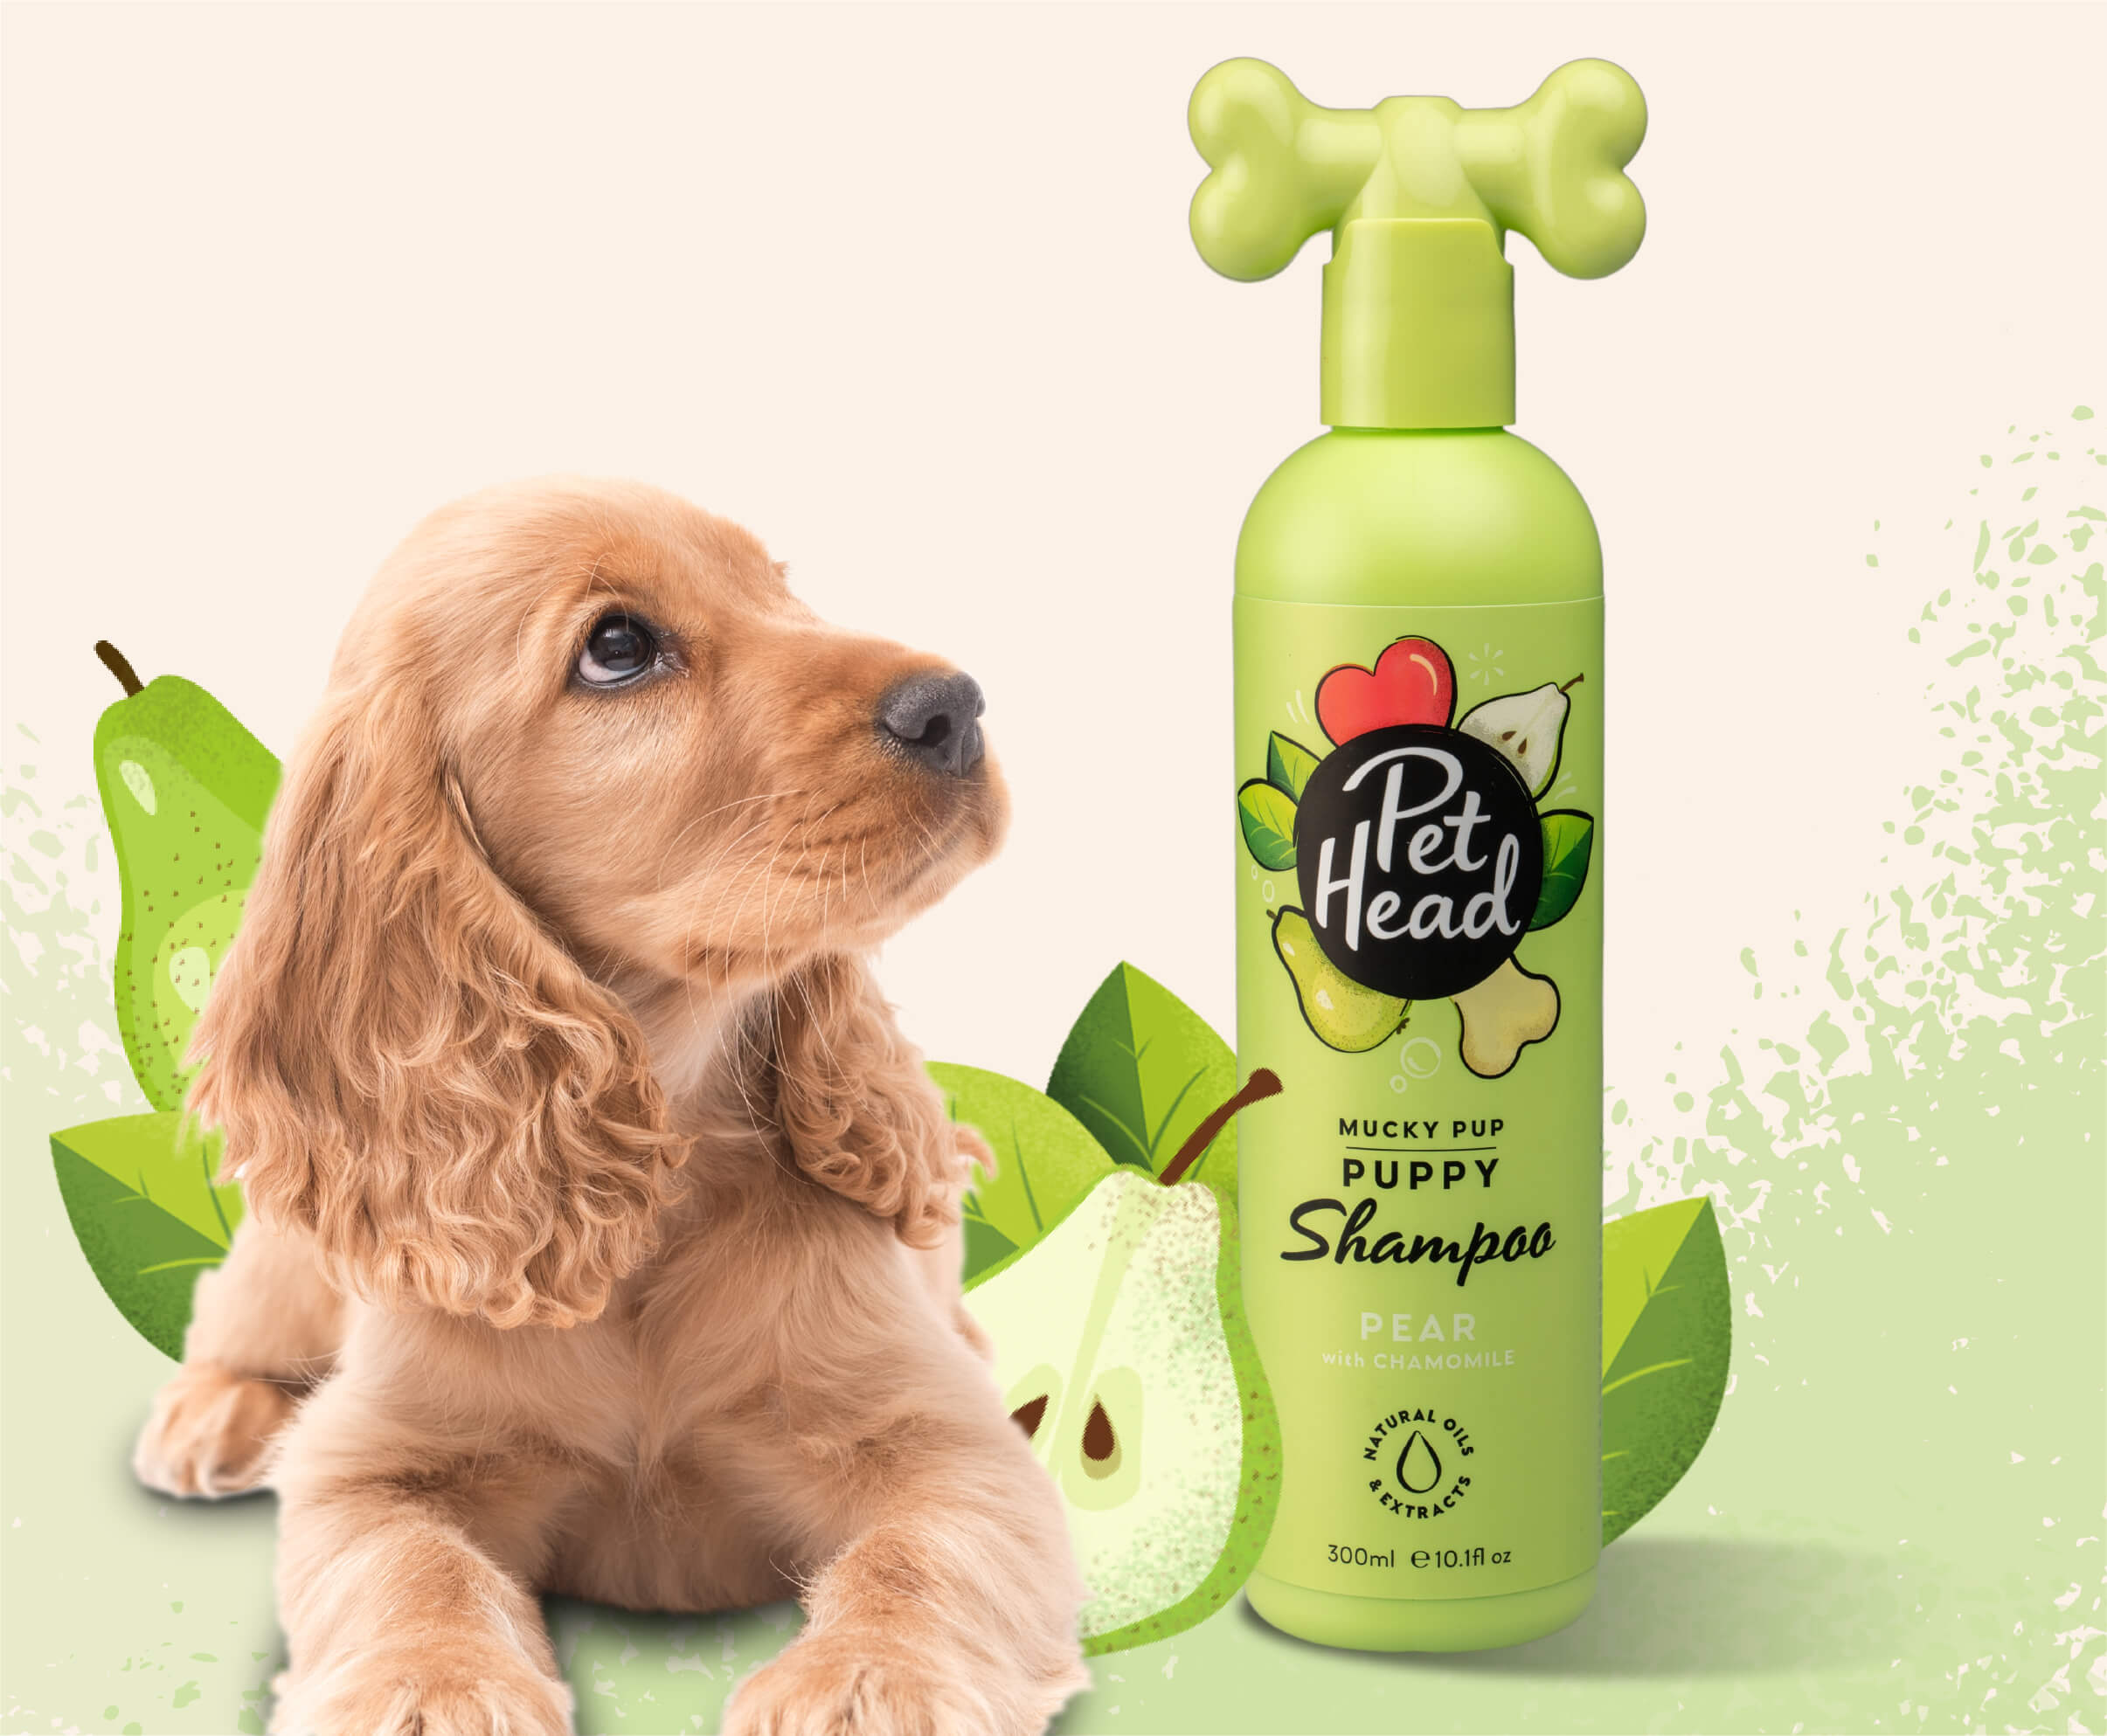 Product shot of the Pet Head Mucky Pup Shampoo with a cockapoo in the background